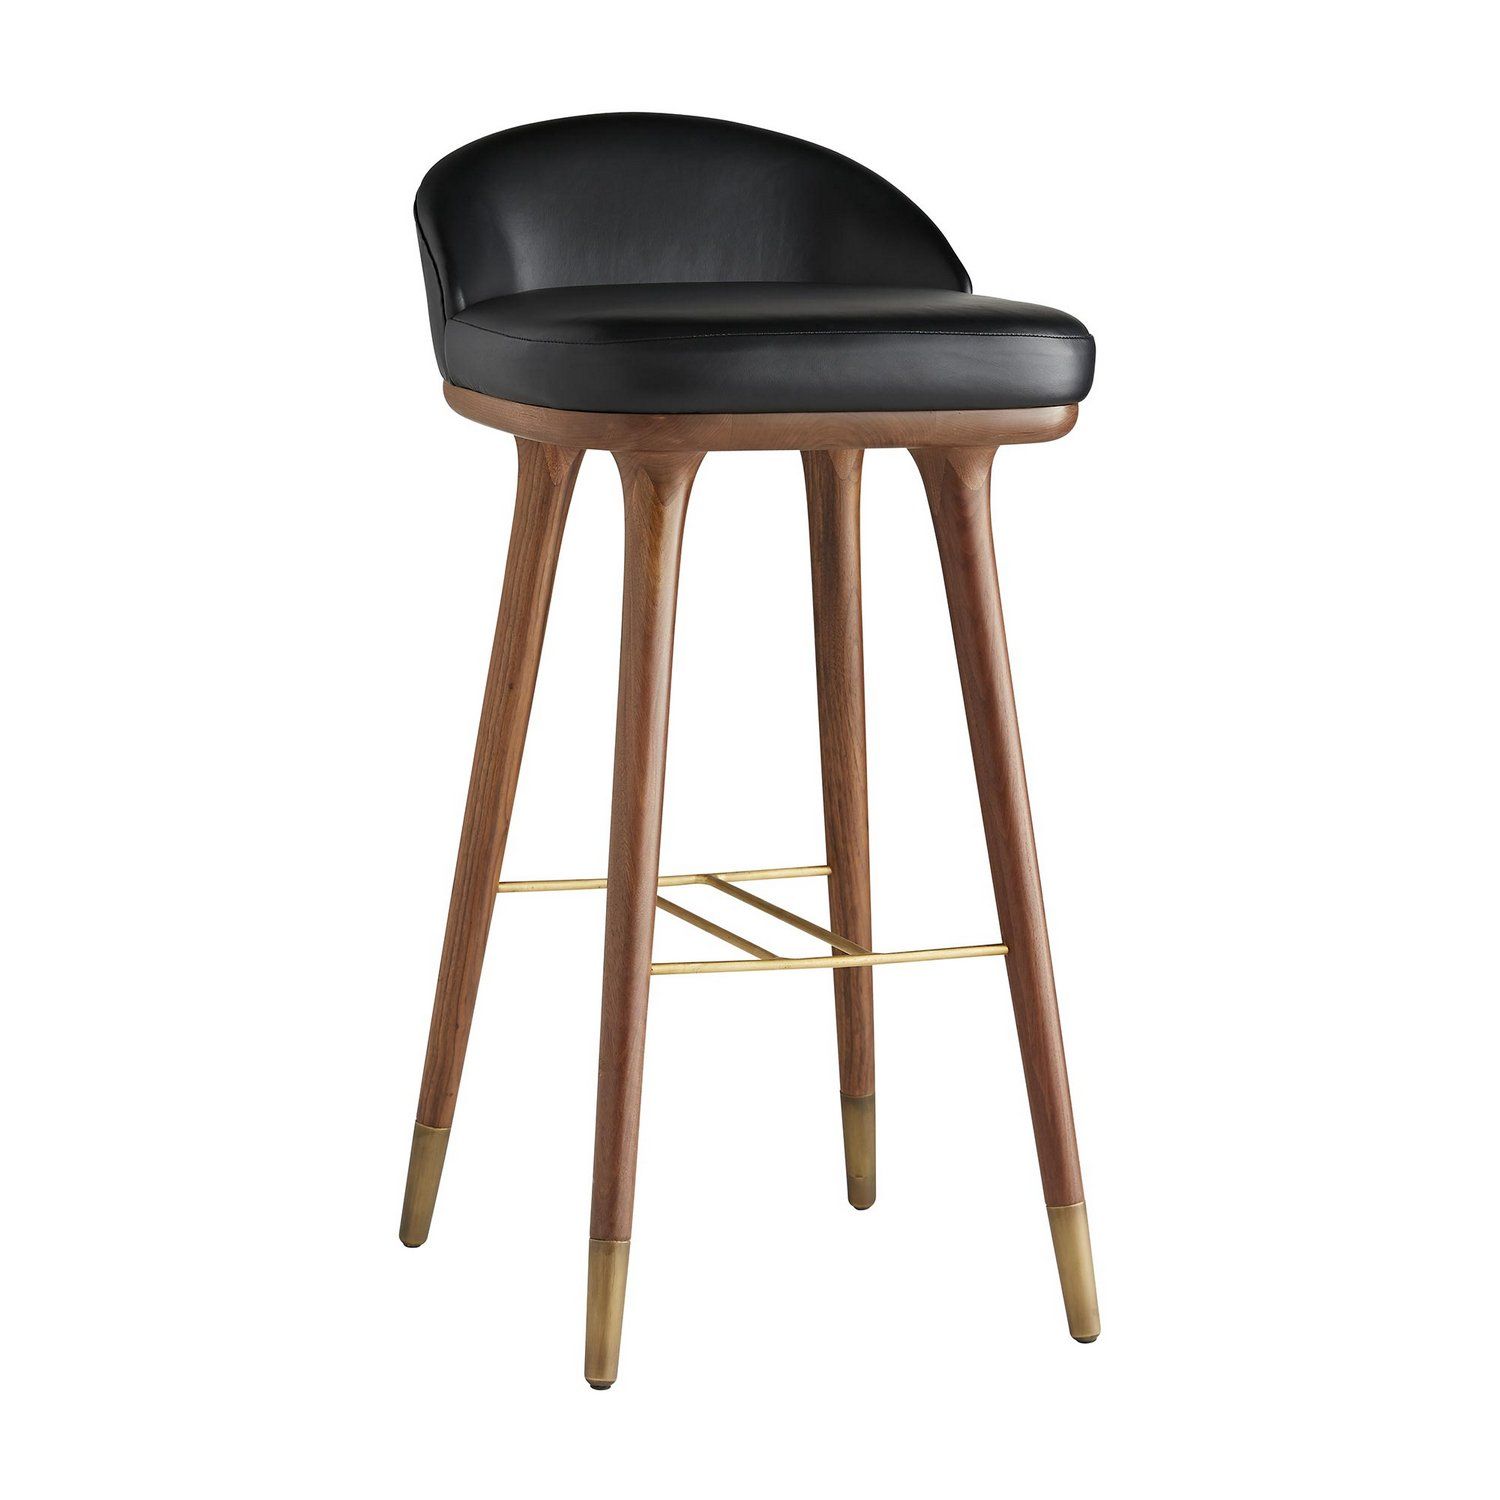 Why Every Home Needs Bar Stools with
Backs and Arms